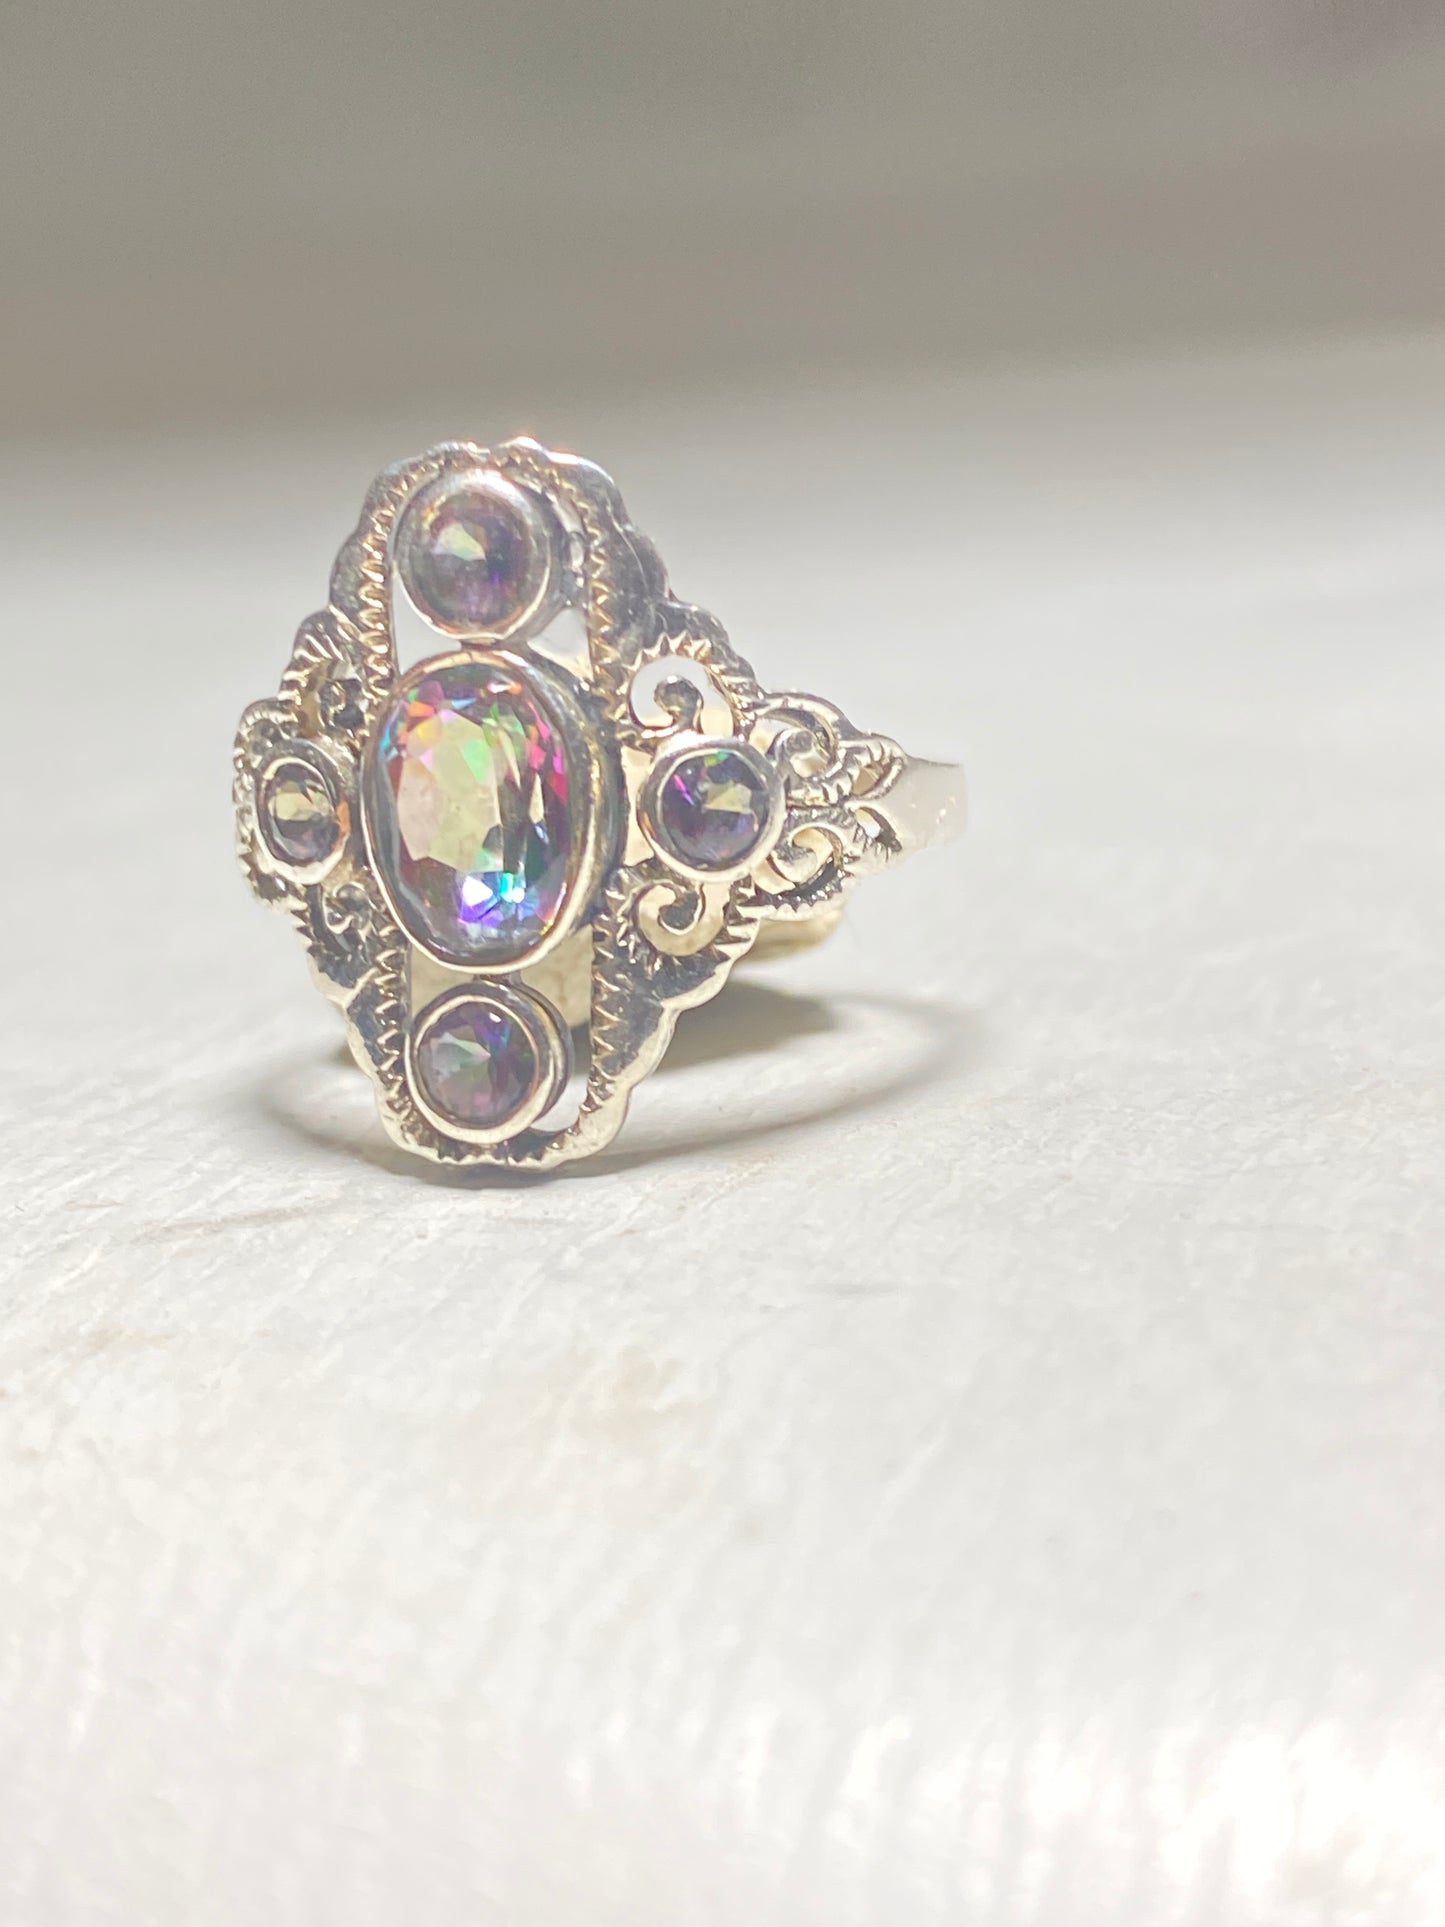 Mystic Topaz ring long sterling silver band women